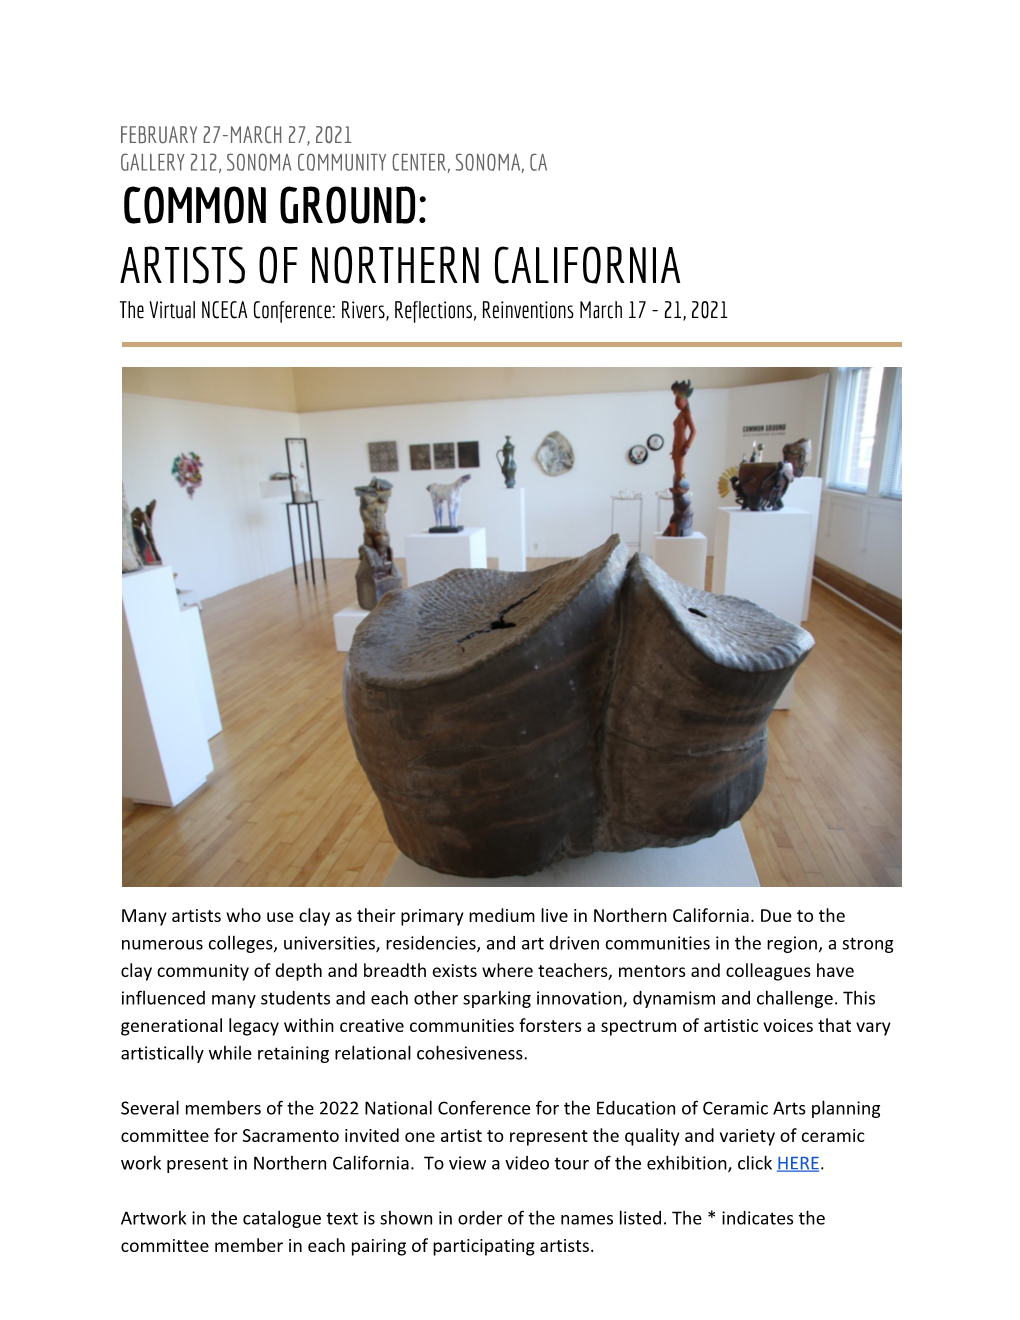 COMMON GROUND: ARTISTS of NORTHERN CALIFORNIA the Virtual NCECA Conference: Rivers, Reflections, Reinventions March 17 - 21, 2021